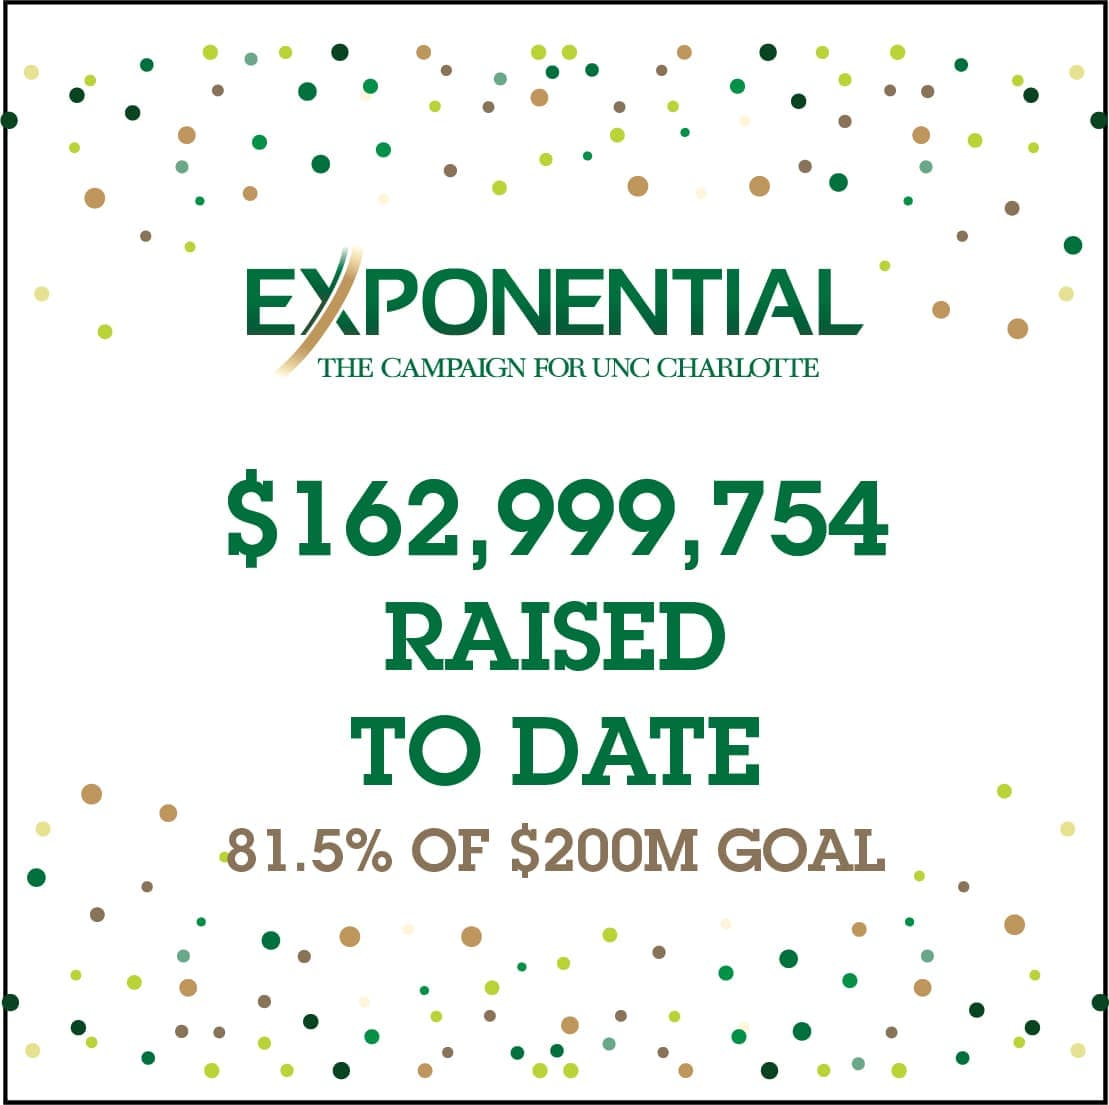 Exponential: $162,999,754 raised to date - 81.5% of $200M goal